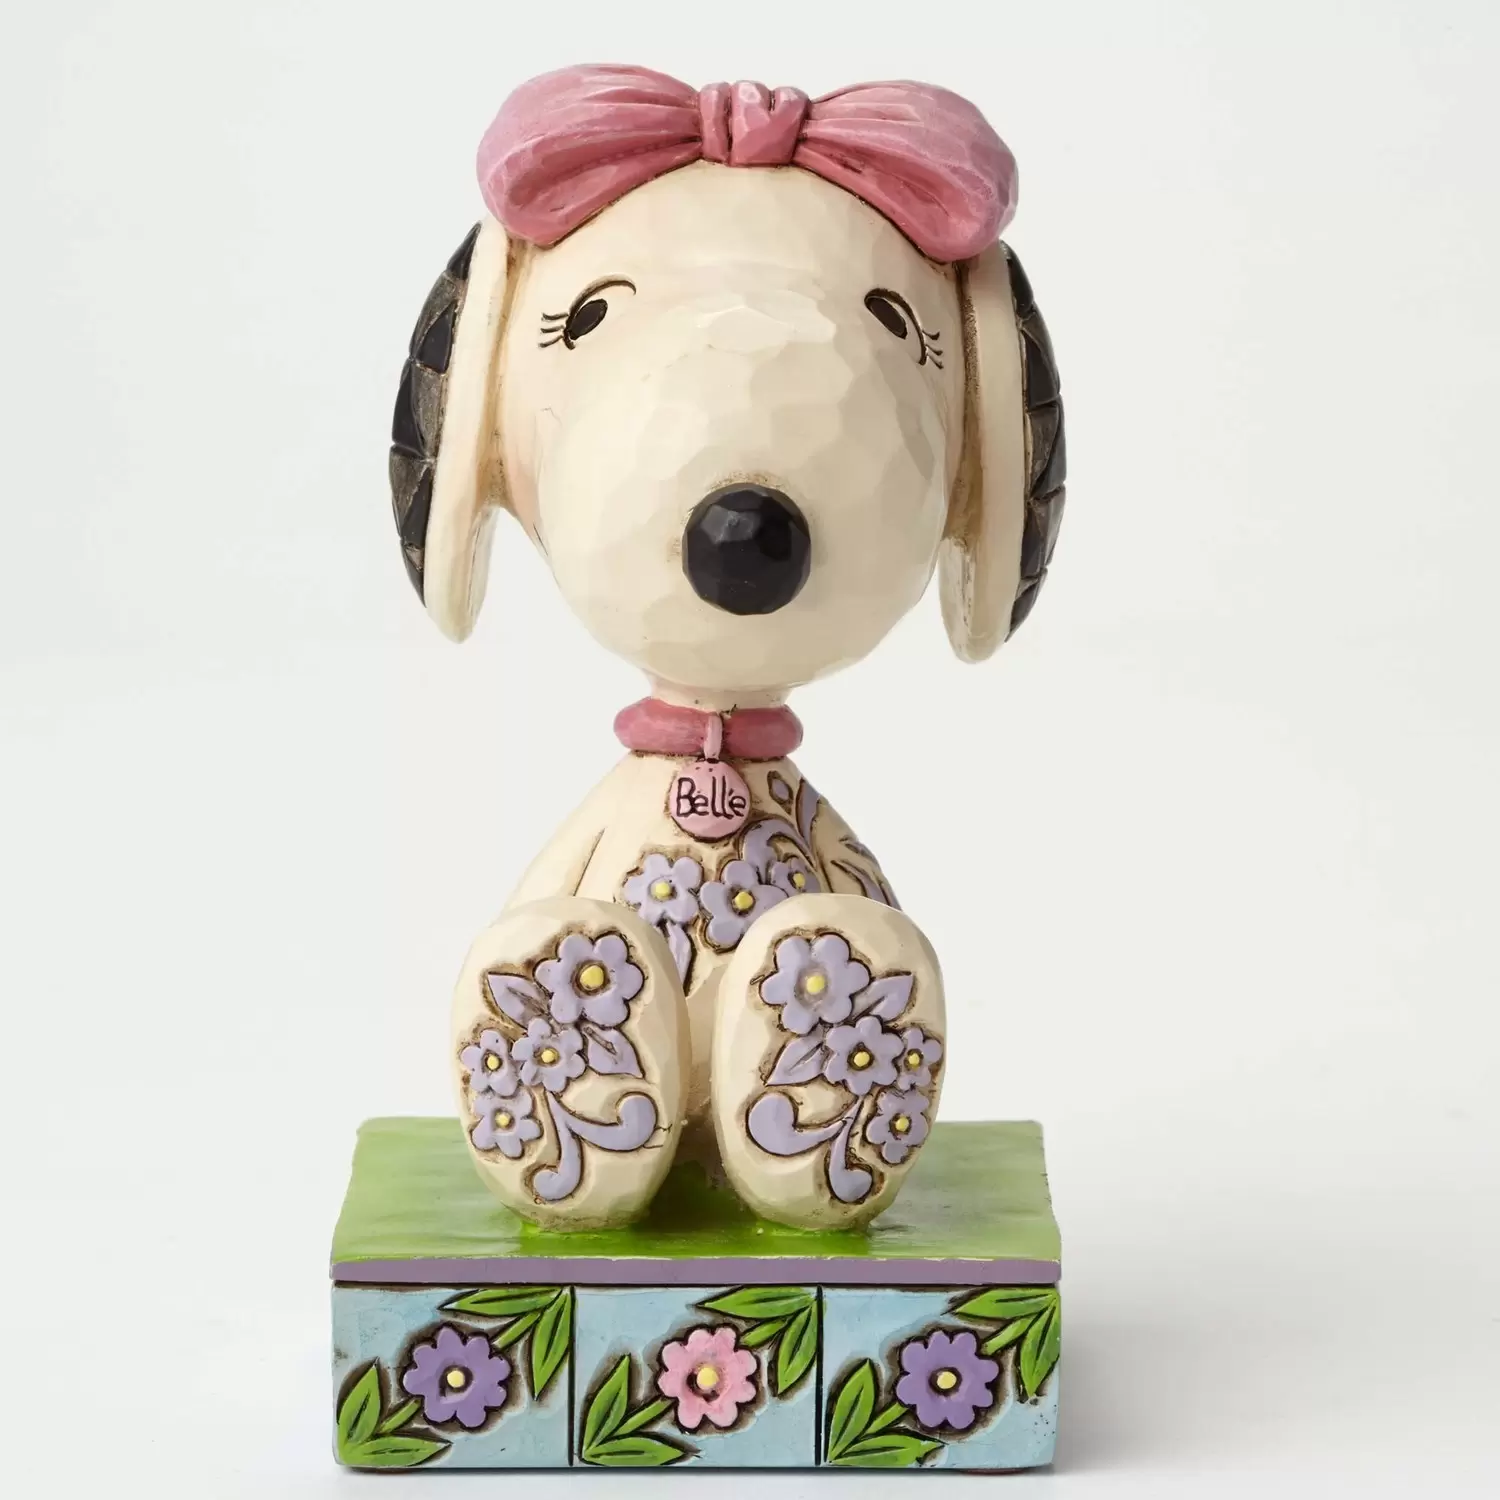 Peanuts - Jim Shore - Snoopy\'s Sister Belle - Belle Personality Pose